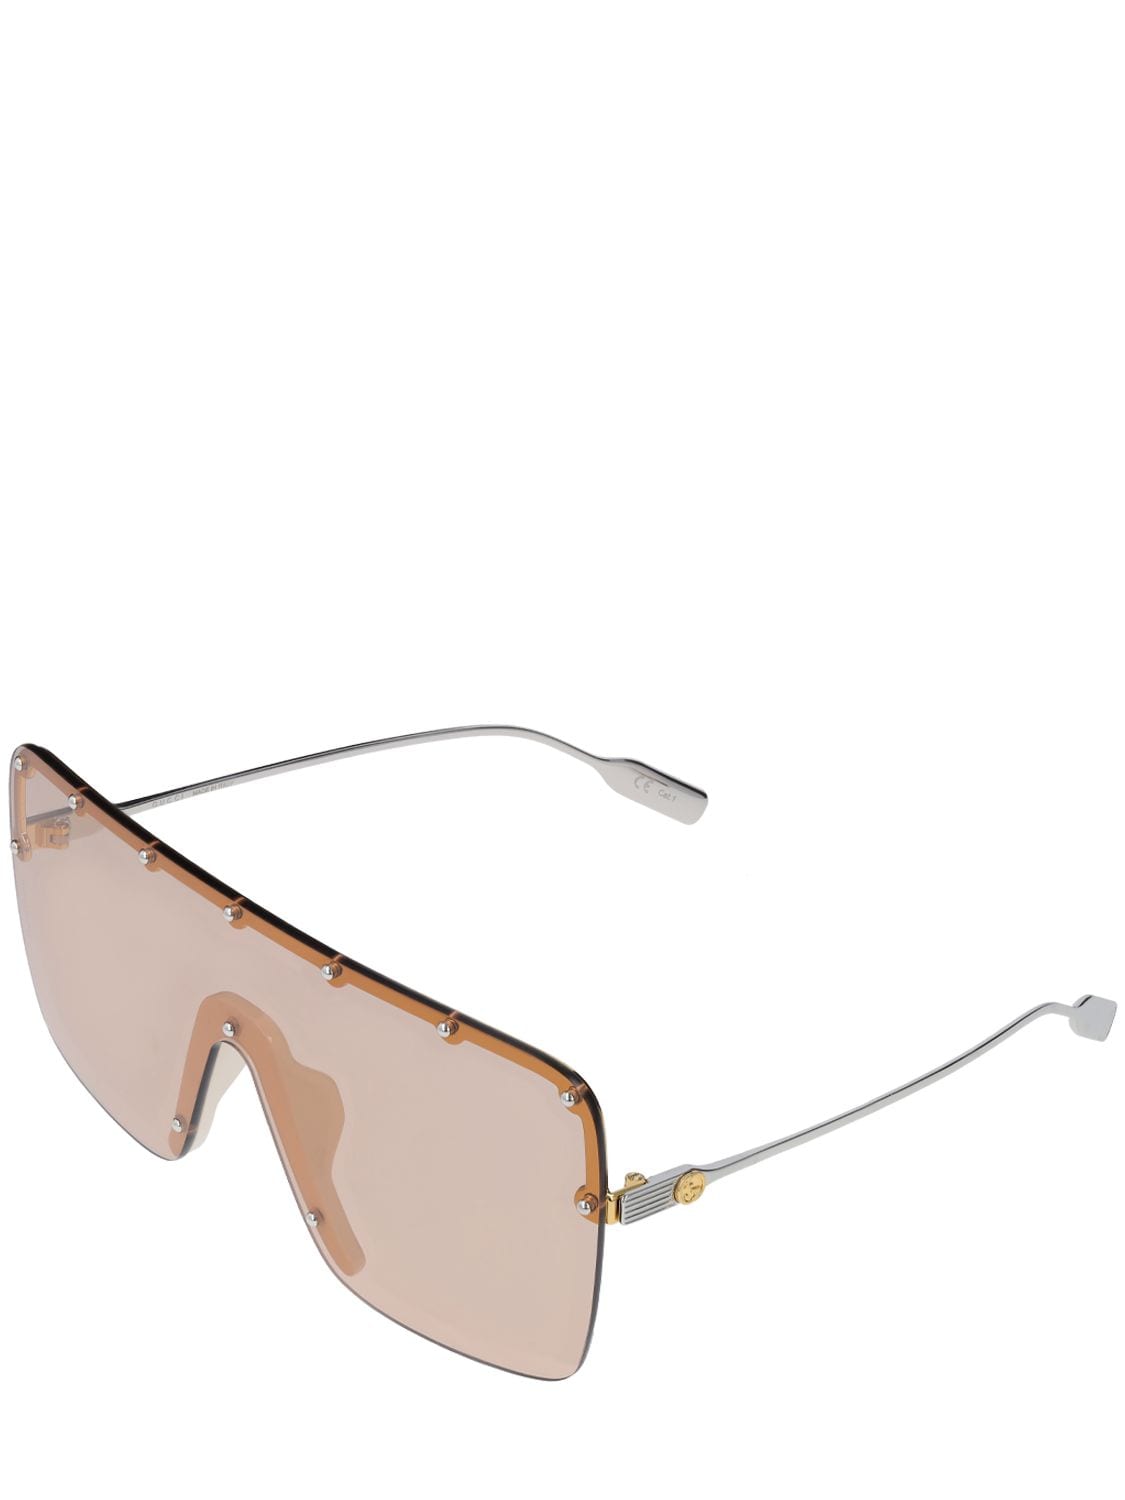 Gucci Gg1245s Sunglasses In Gold,pink | ModeSens